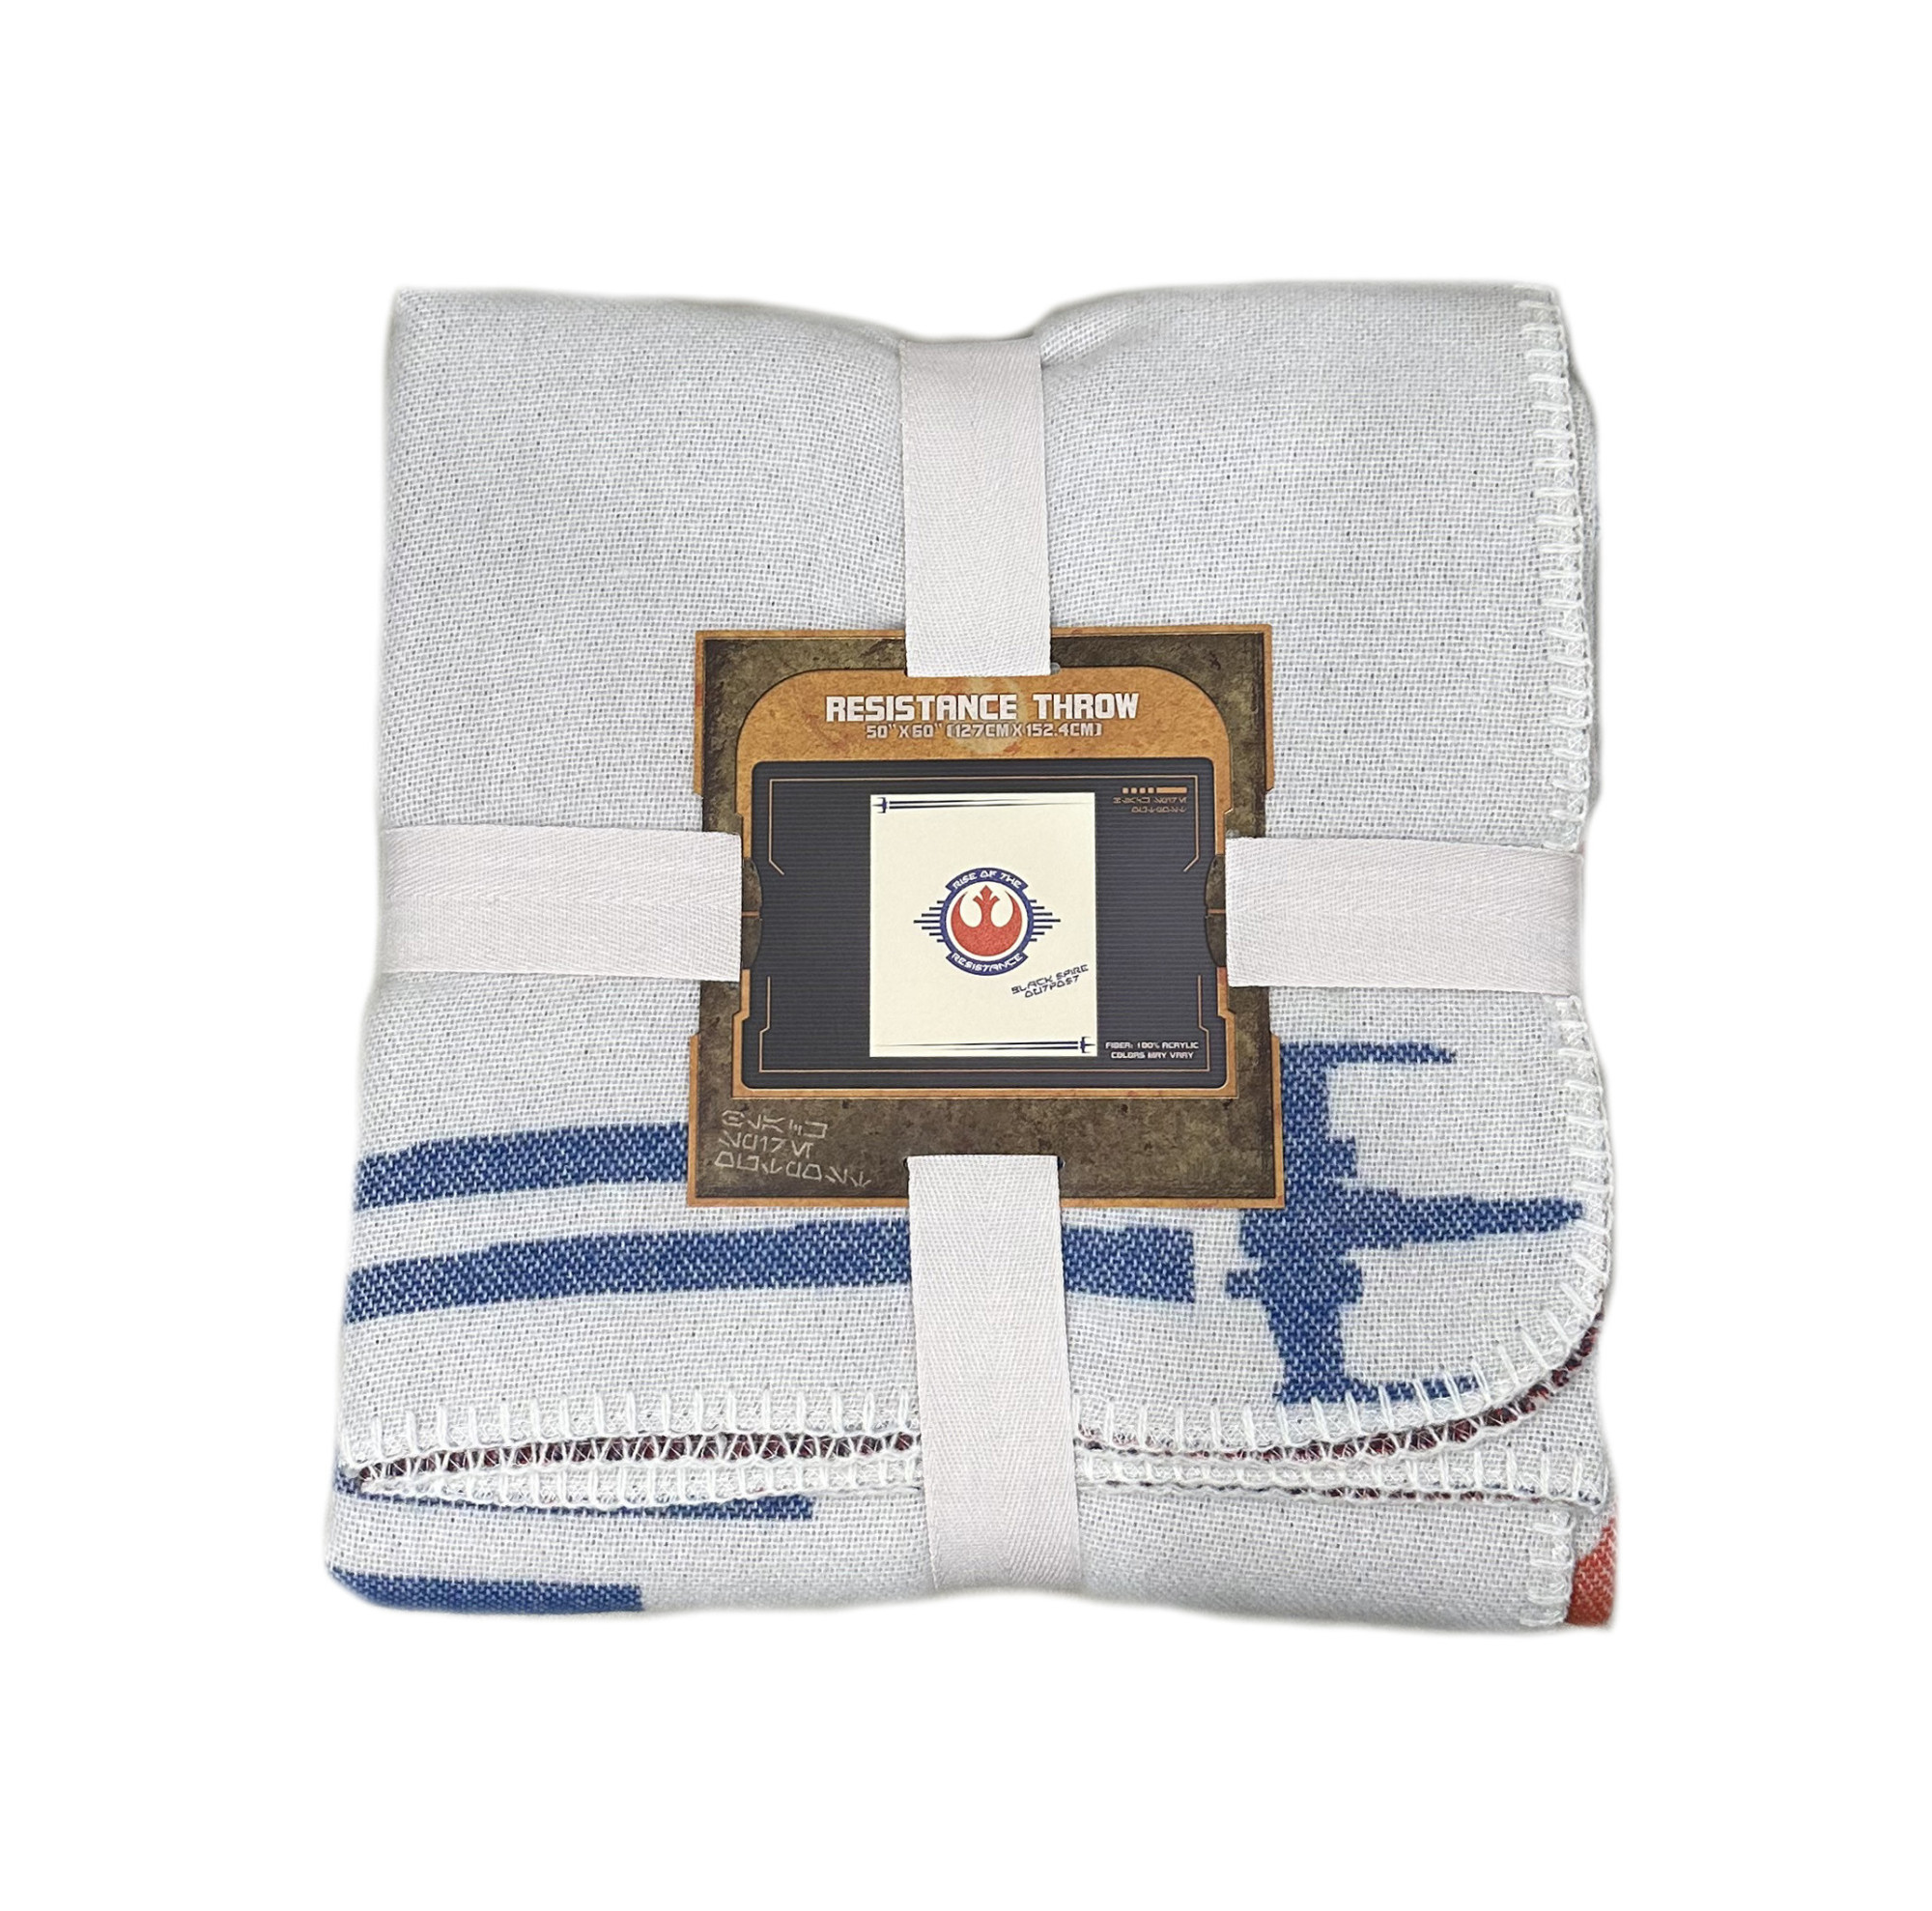 products Disney Parks - Resistance Throw Blanket - Star Wars